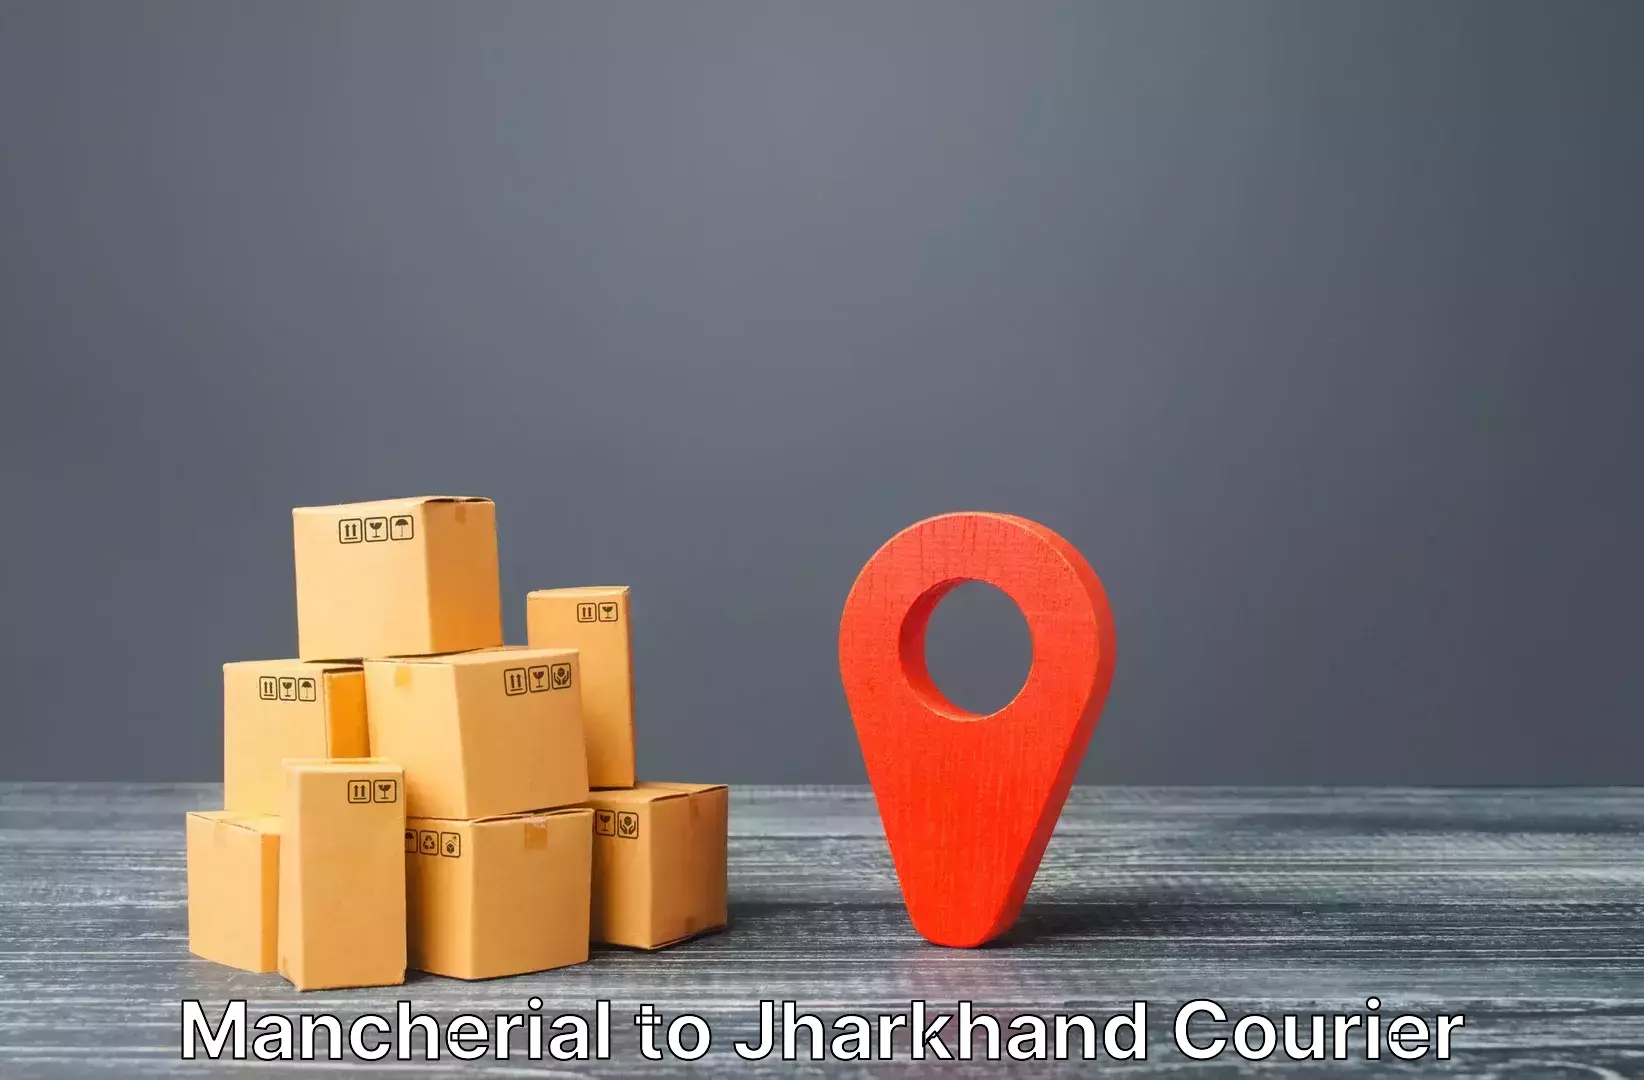 Express luggage delivery Mancherial to Domchanch